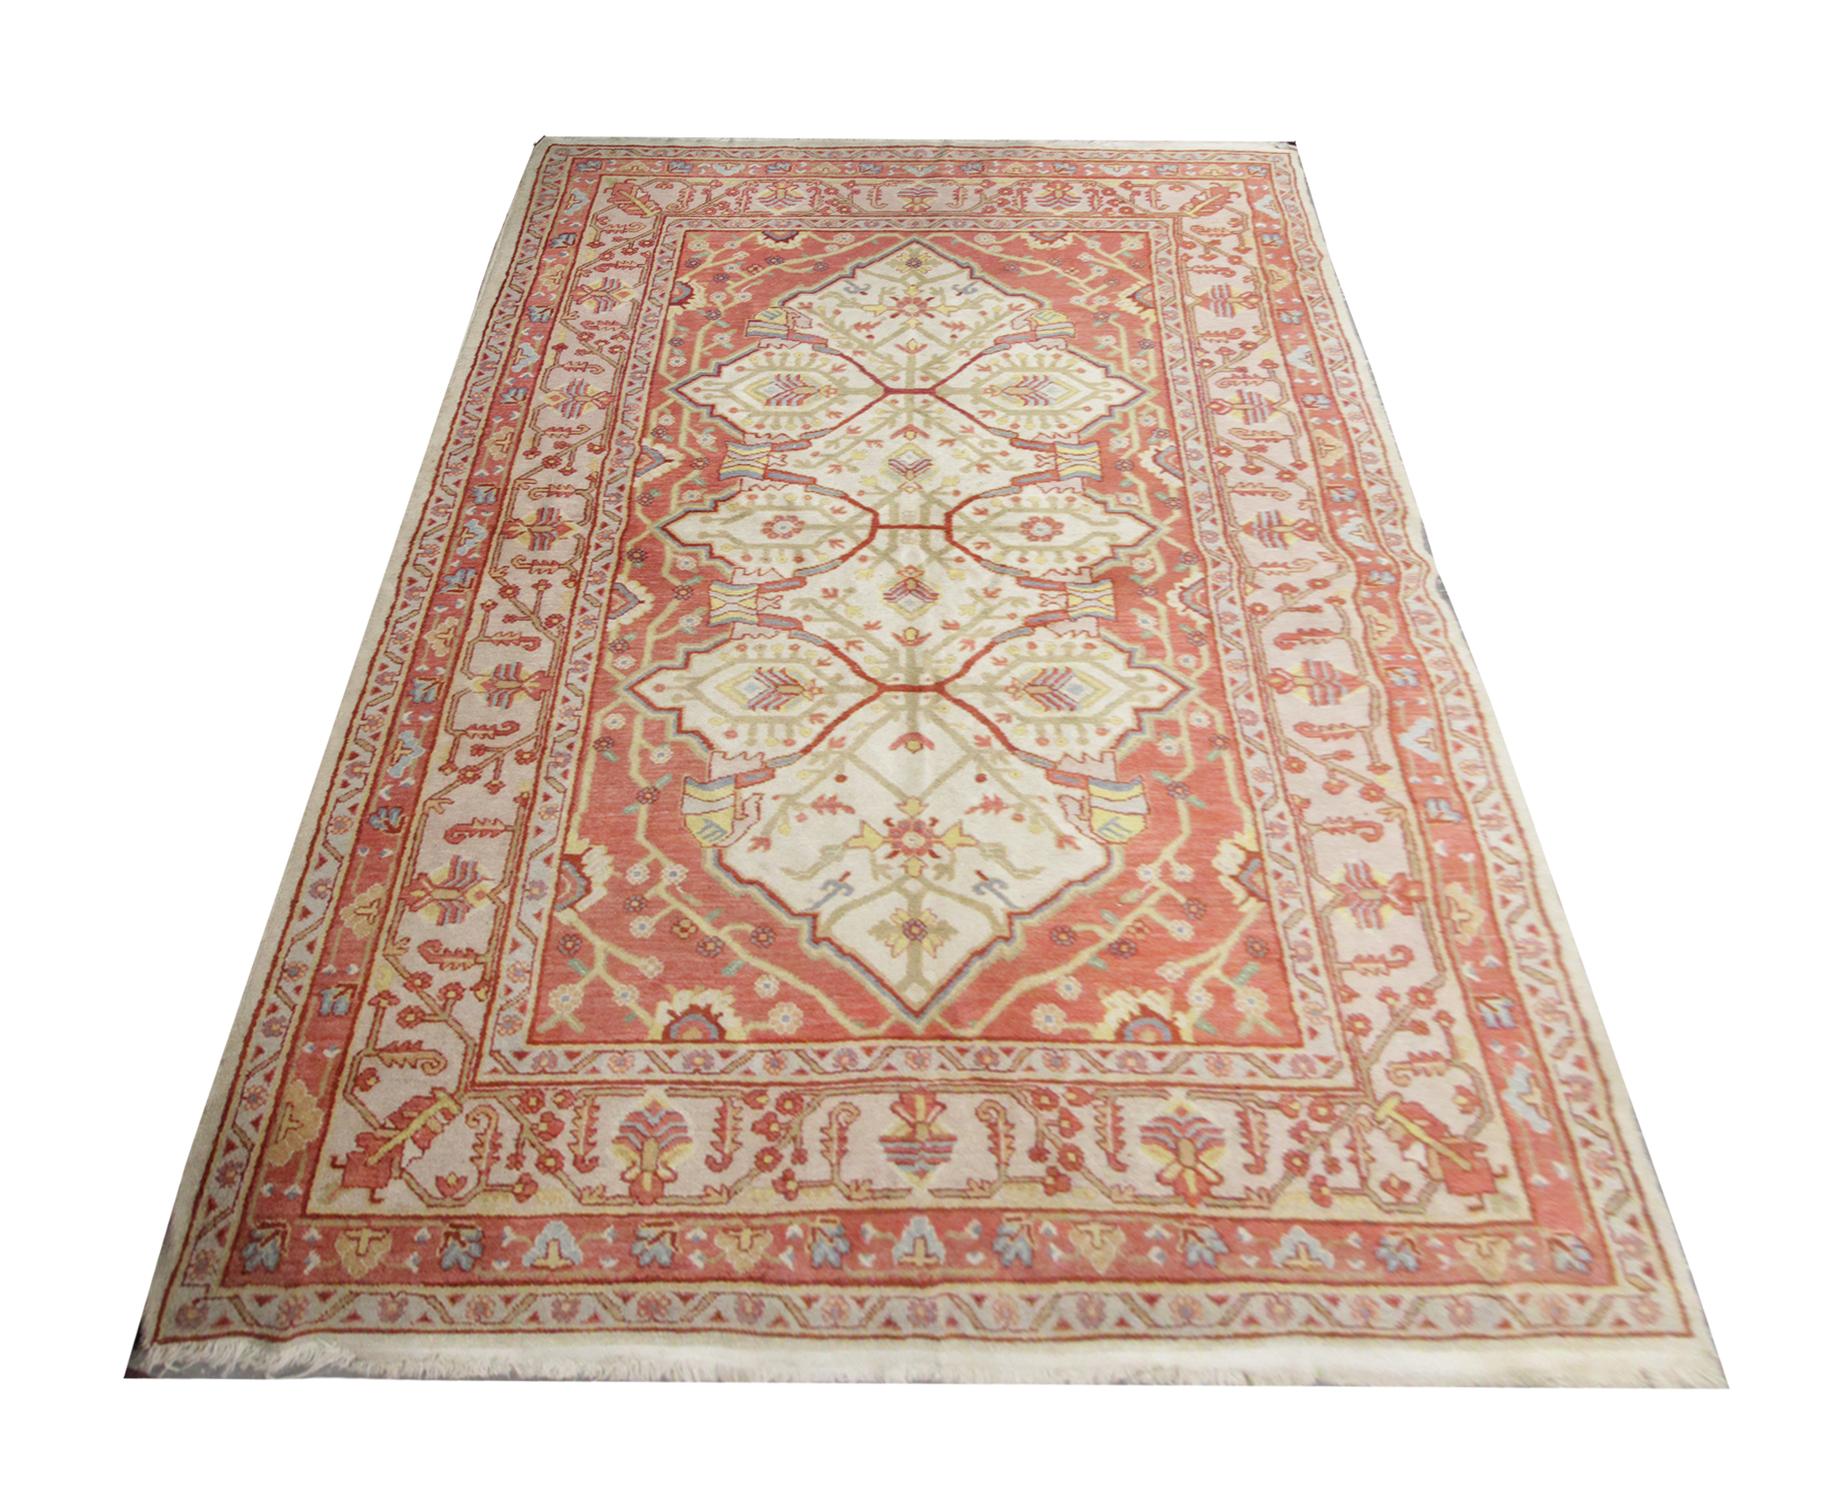 The bold geometric print and subtle pastel colors are woven into this hand knotted wool area rug work together creating a truly beautiful look. This antique Turkish rug features an abstract pattern and asymmetrical centrepiece. The softer pallet and